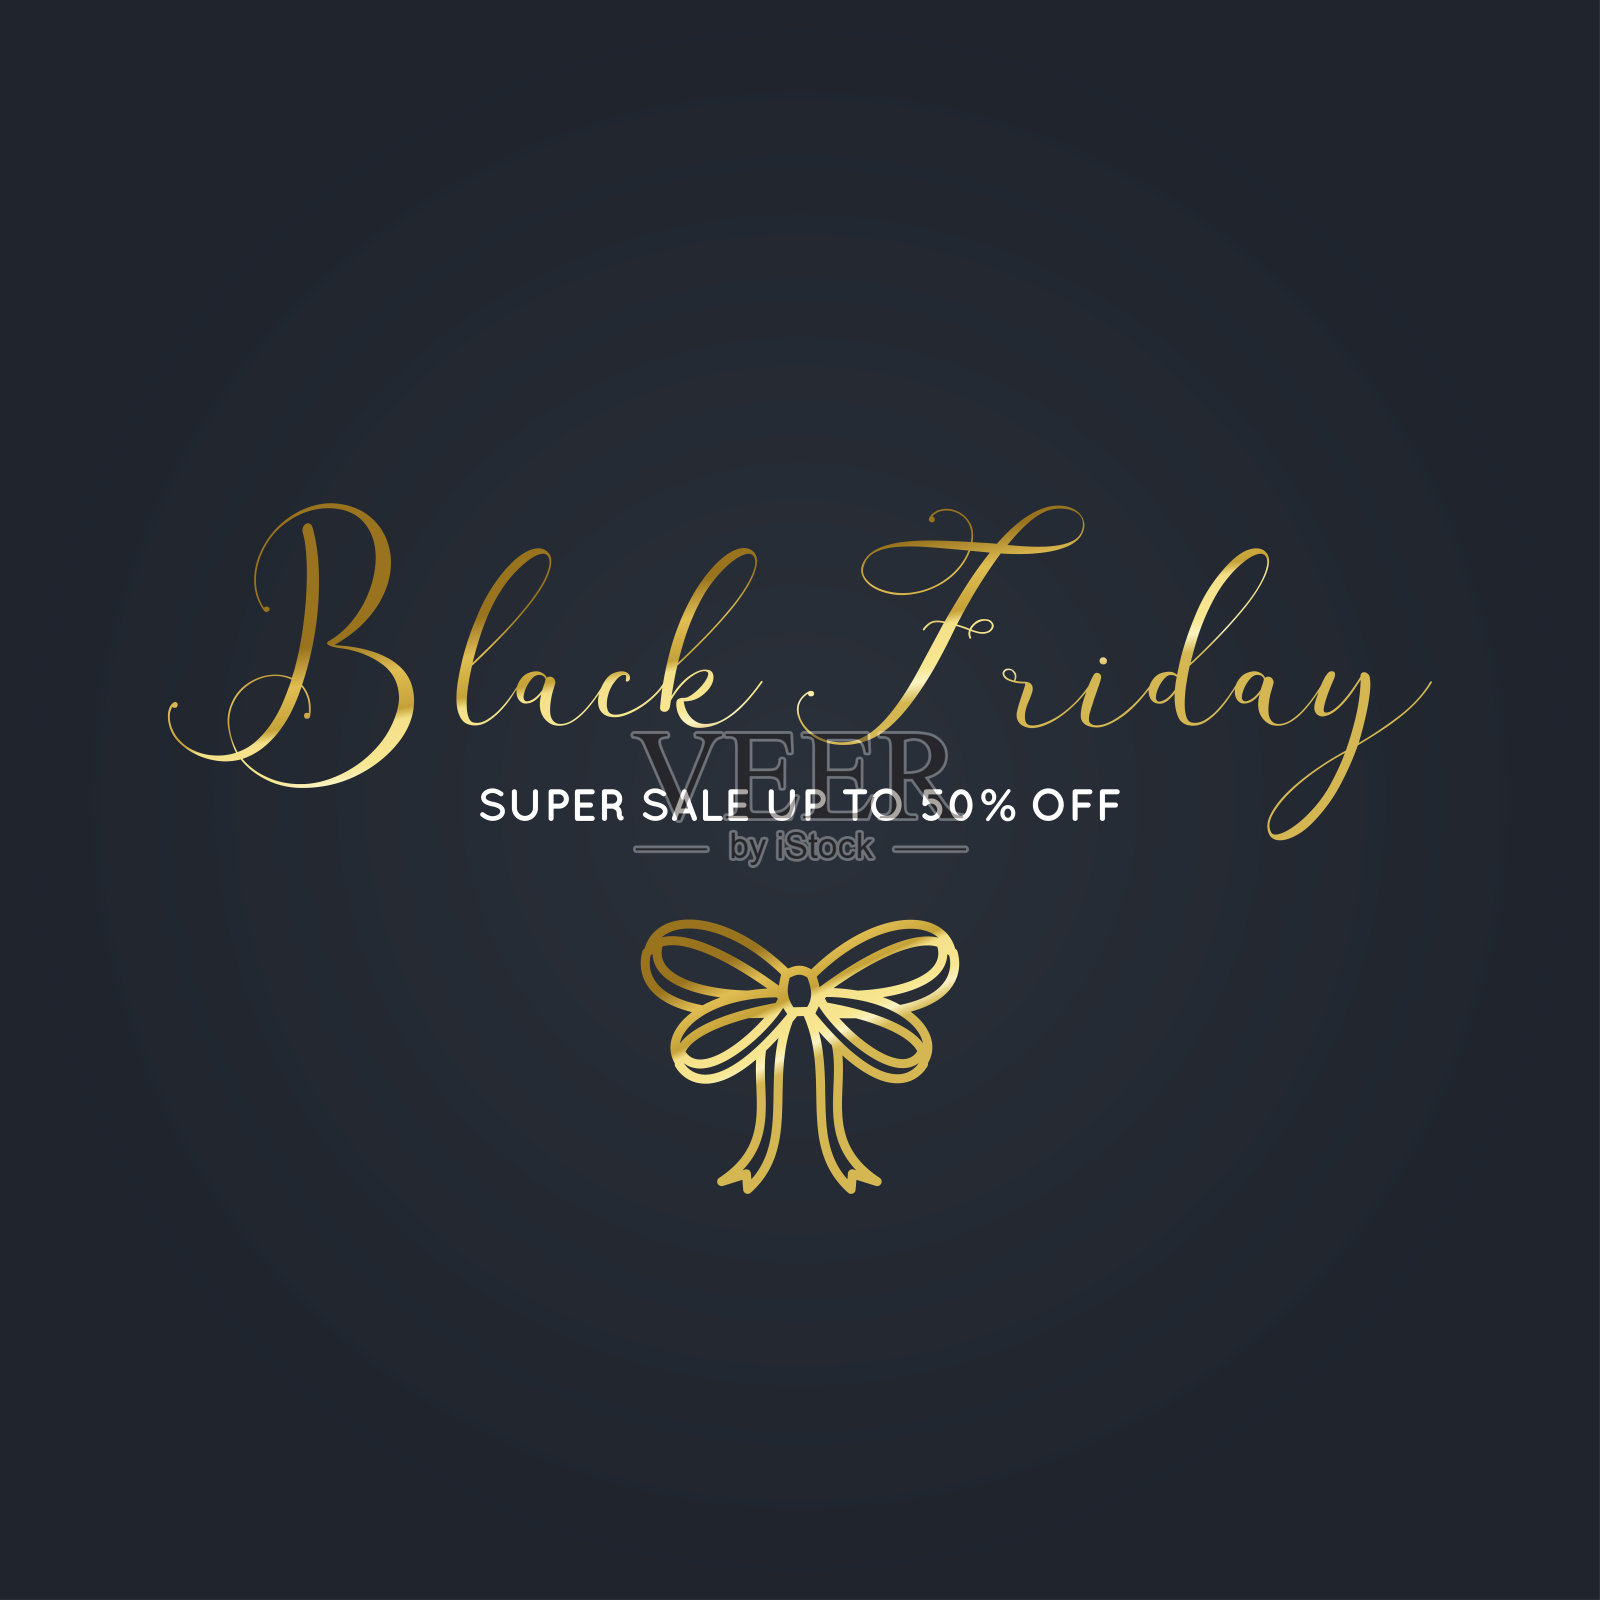 Beautiful Black Friday gold banner with a bow vector背景图片素材